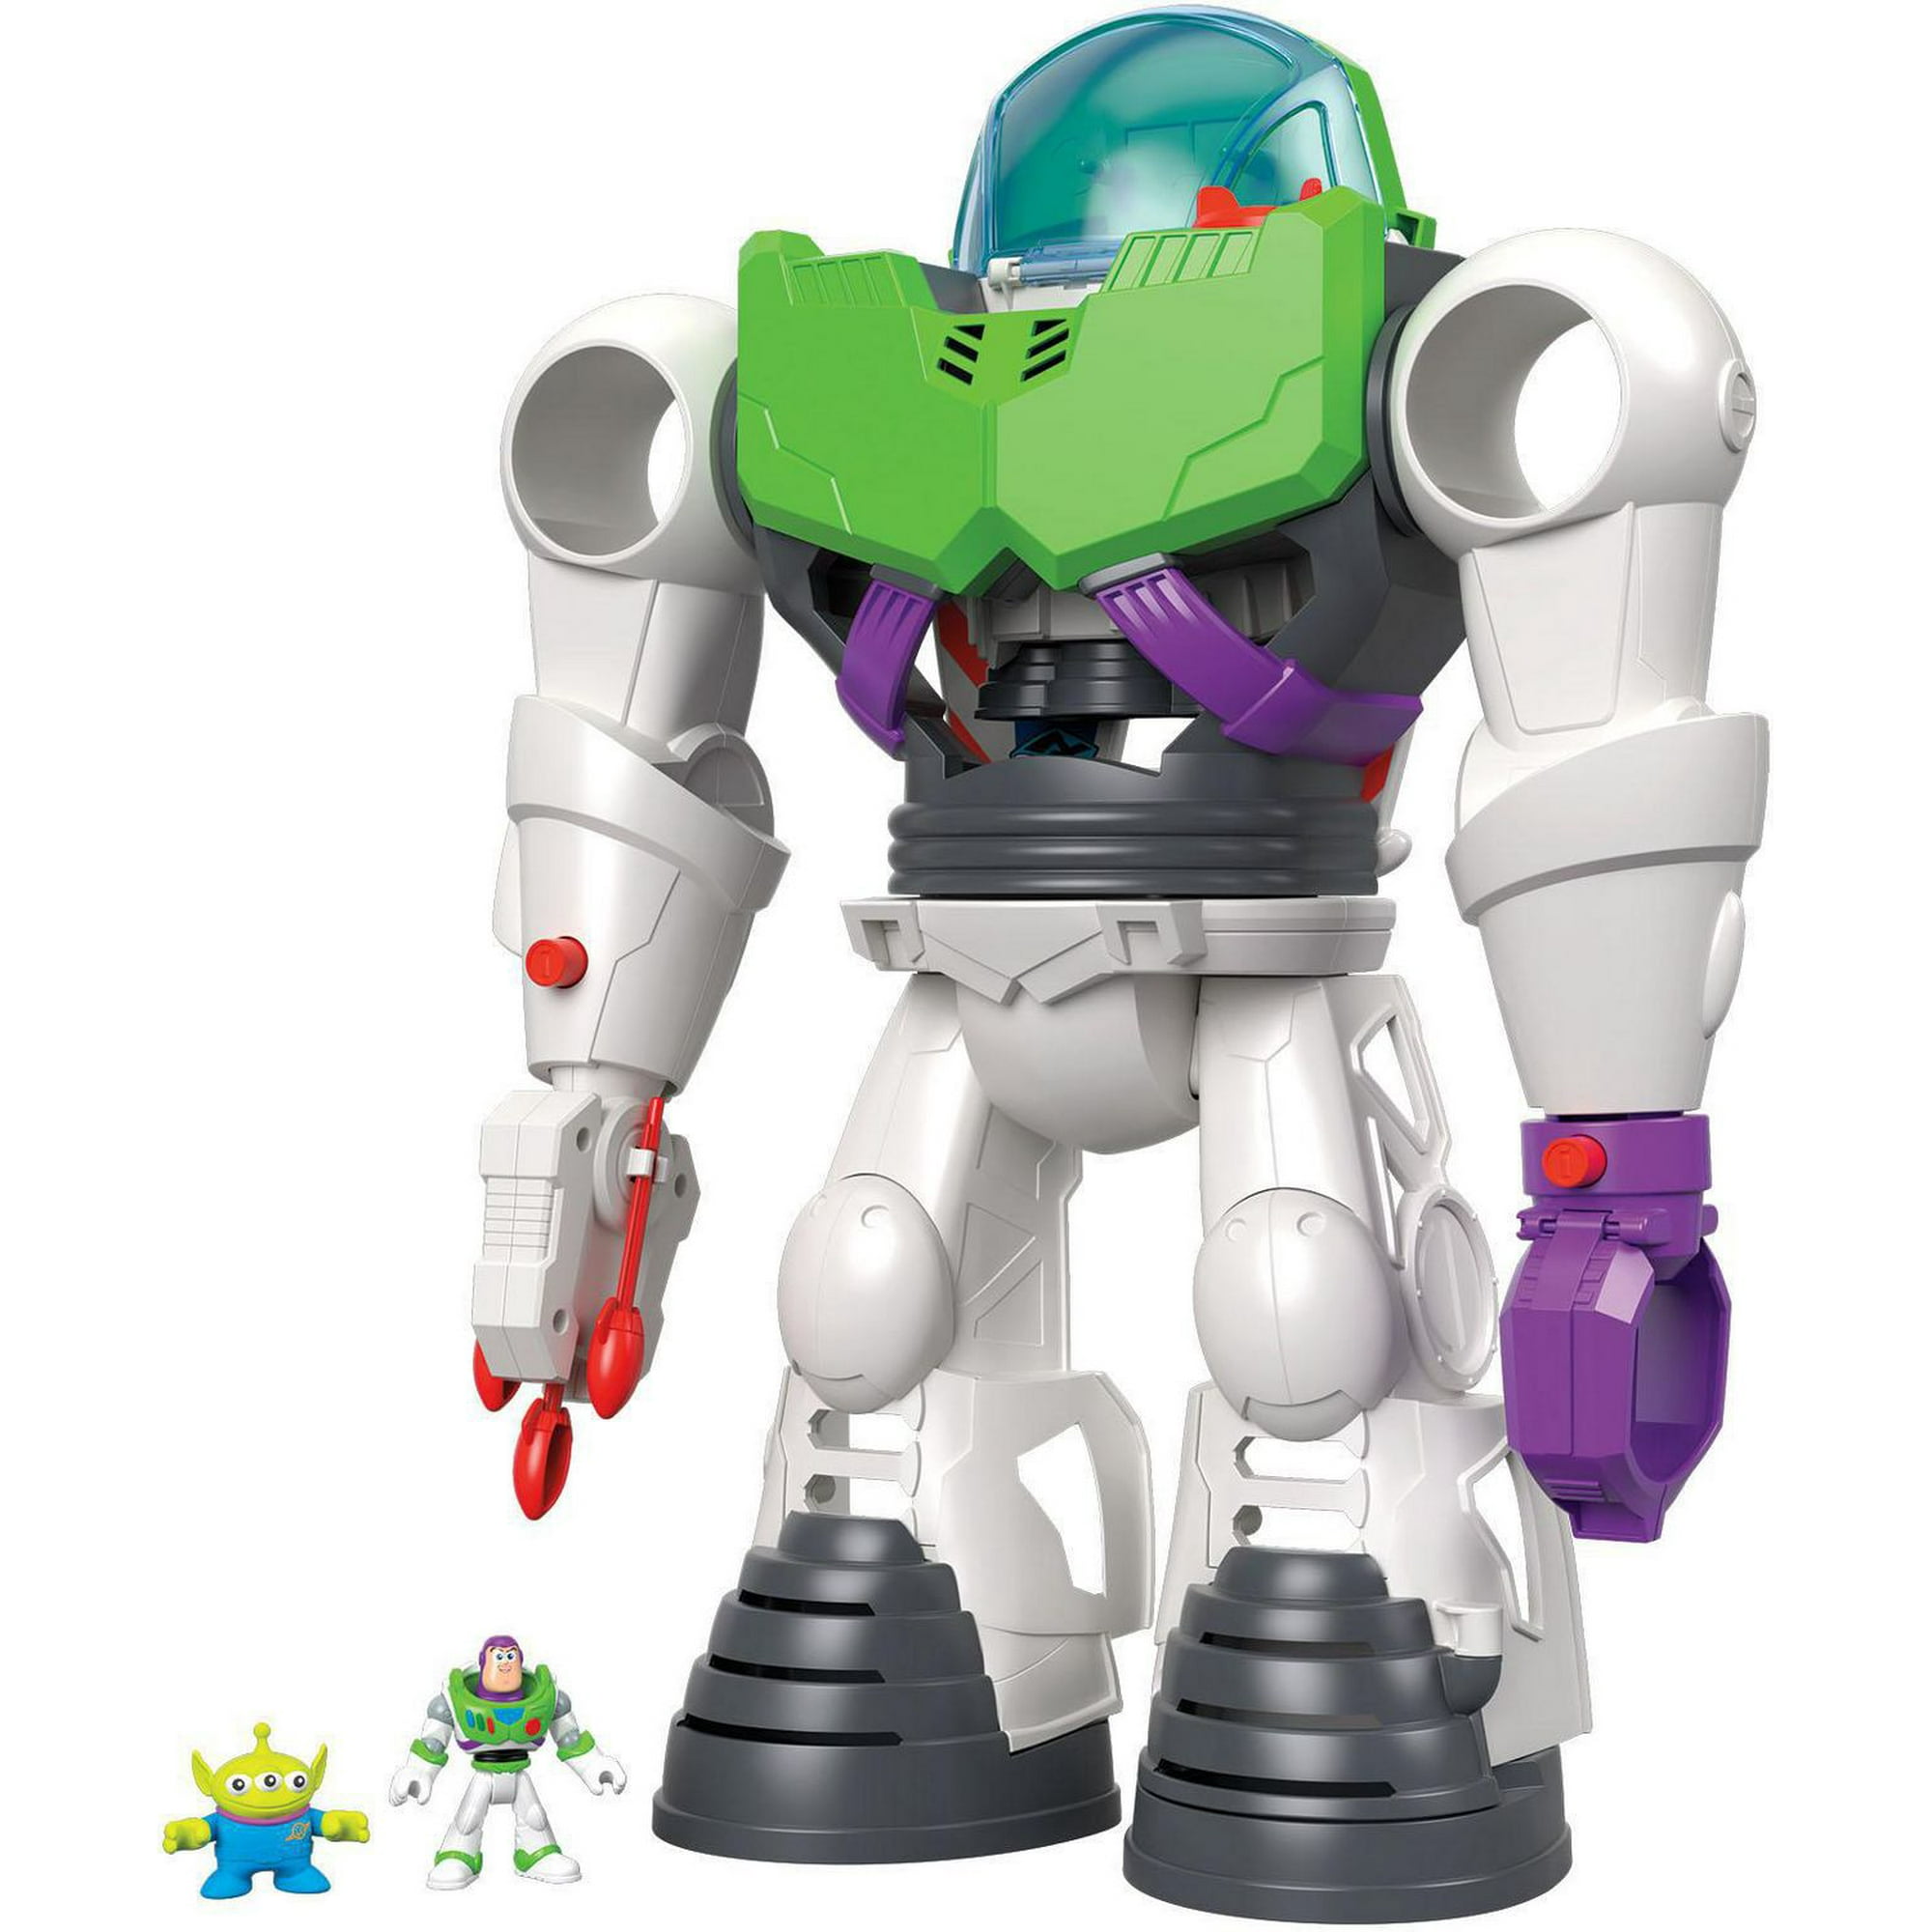 The toy story this season / Friendly robots, interactive learning